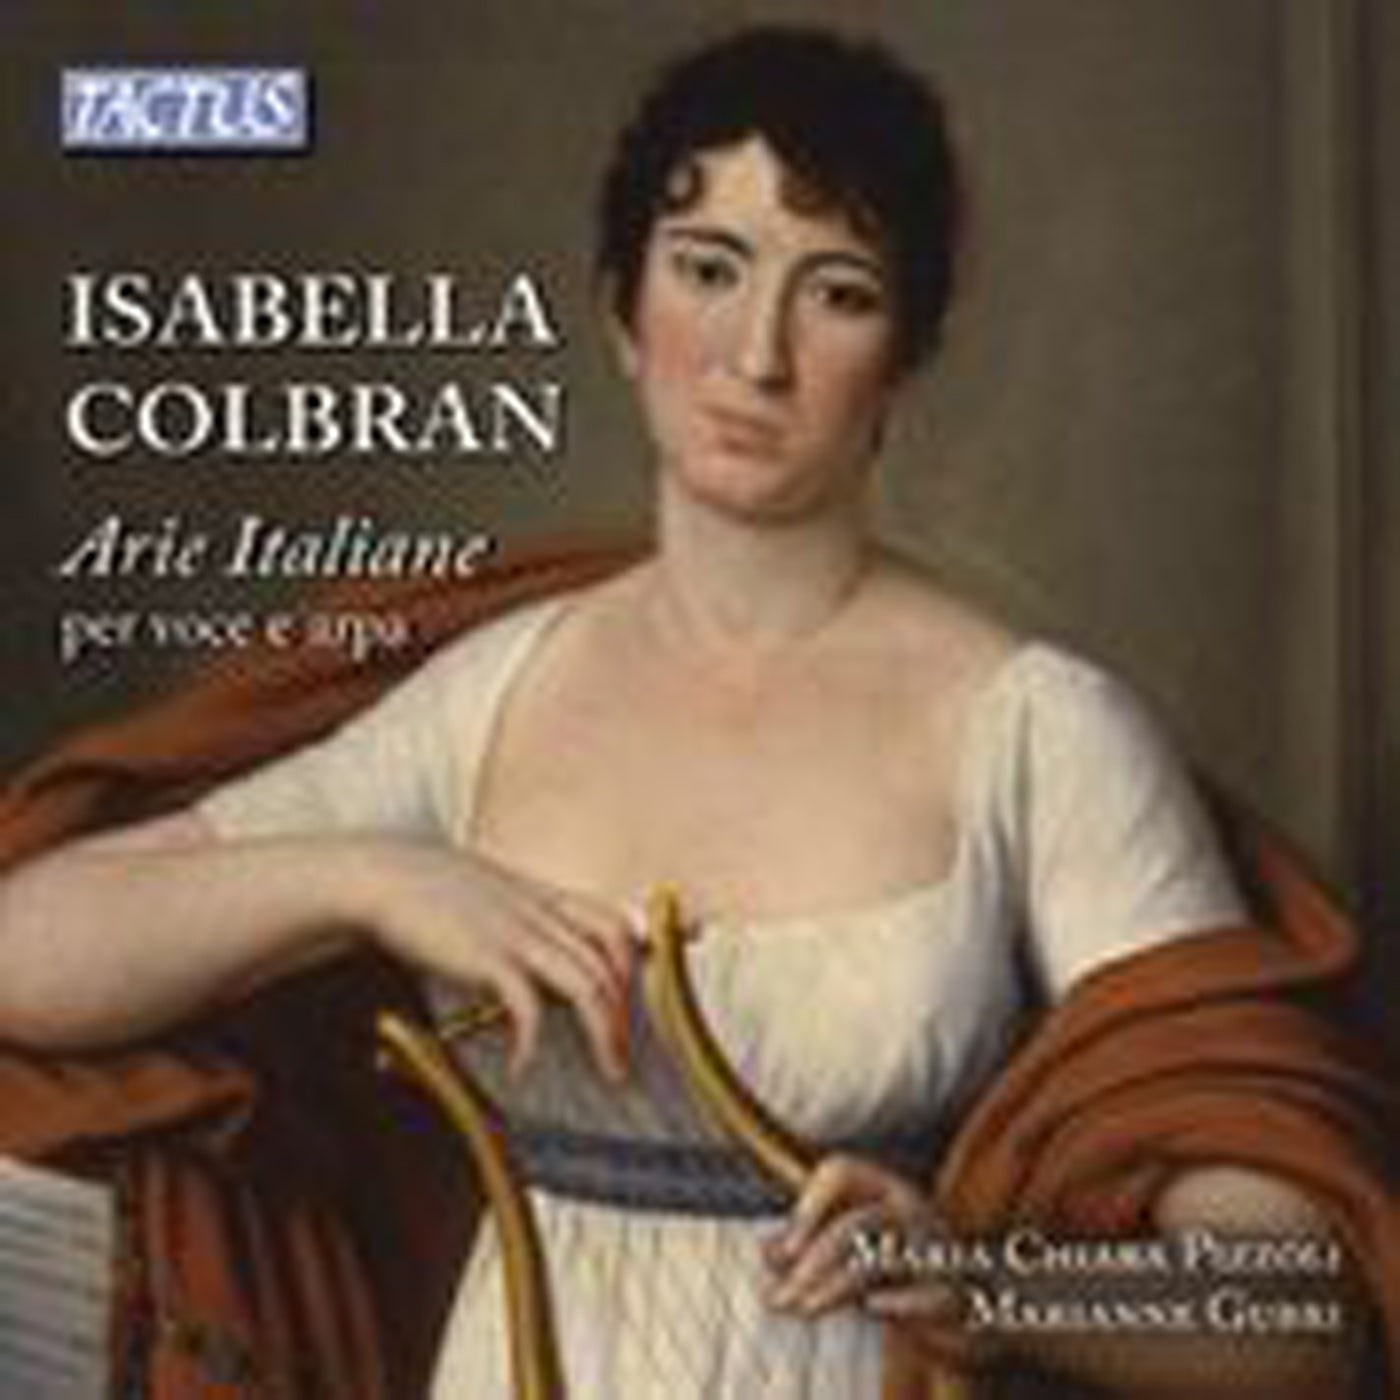 Colbran: Italian Arias for Voice and Harp